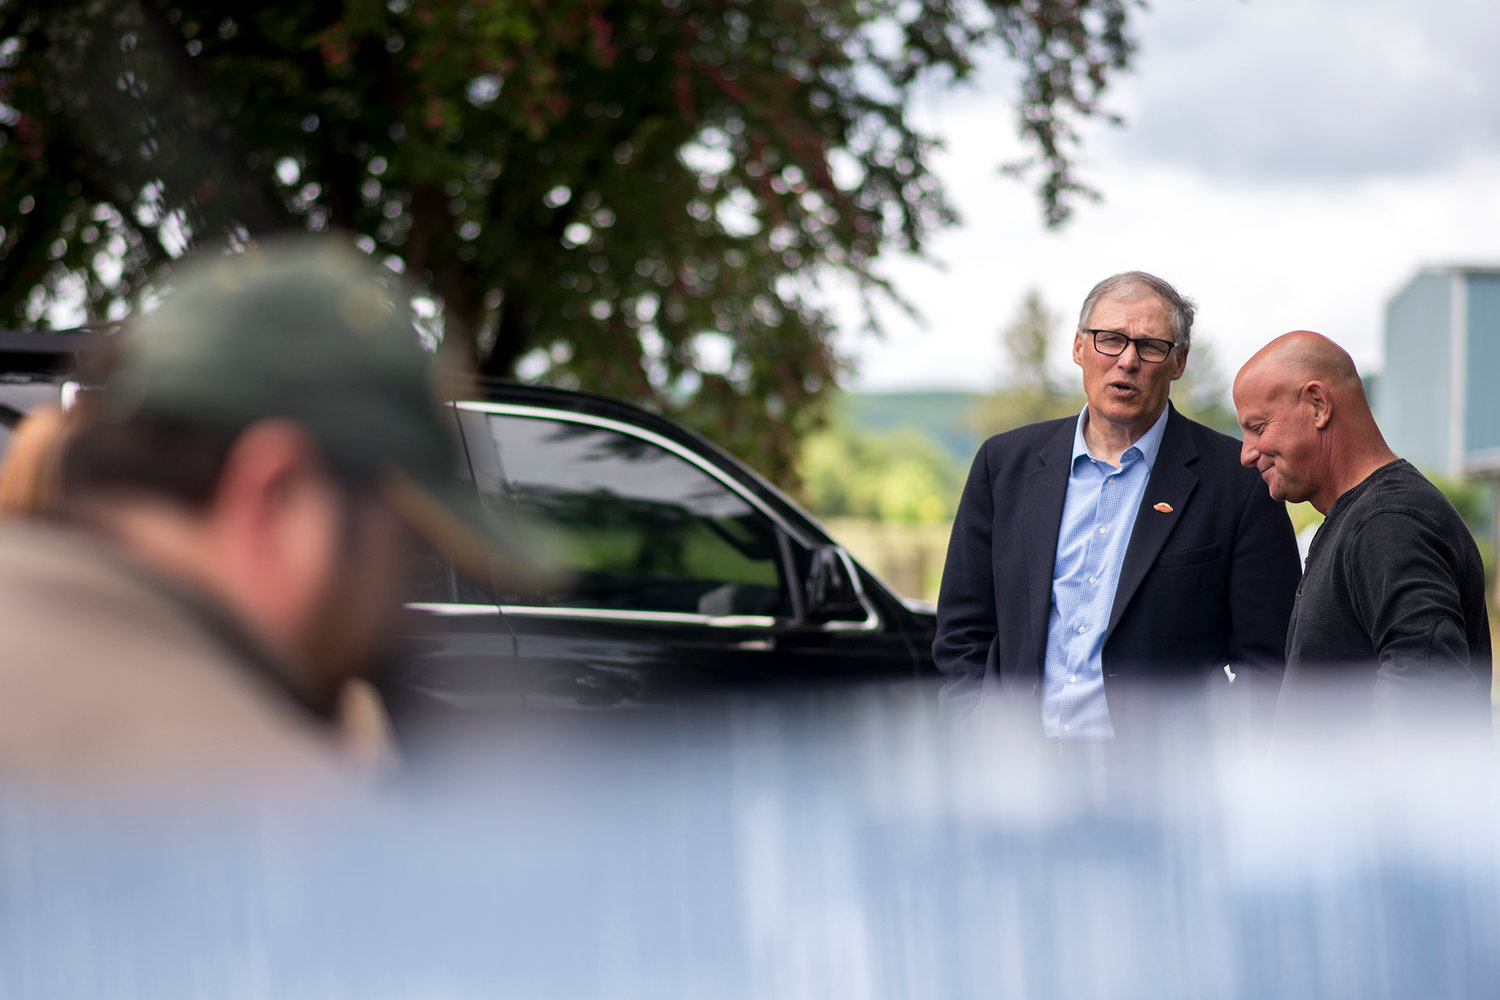 Gov. Jay Inslee, center, speaks with Adna rancher John Brunoff, right, during a June 2017 tour of local areas that have been devastated by past flooding.